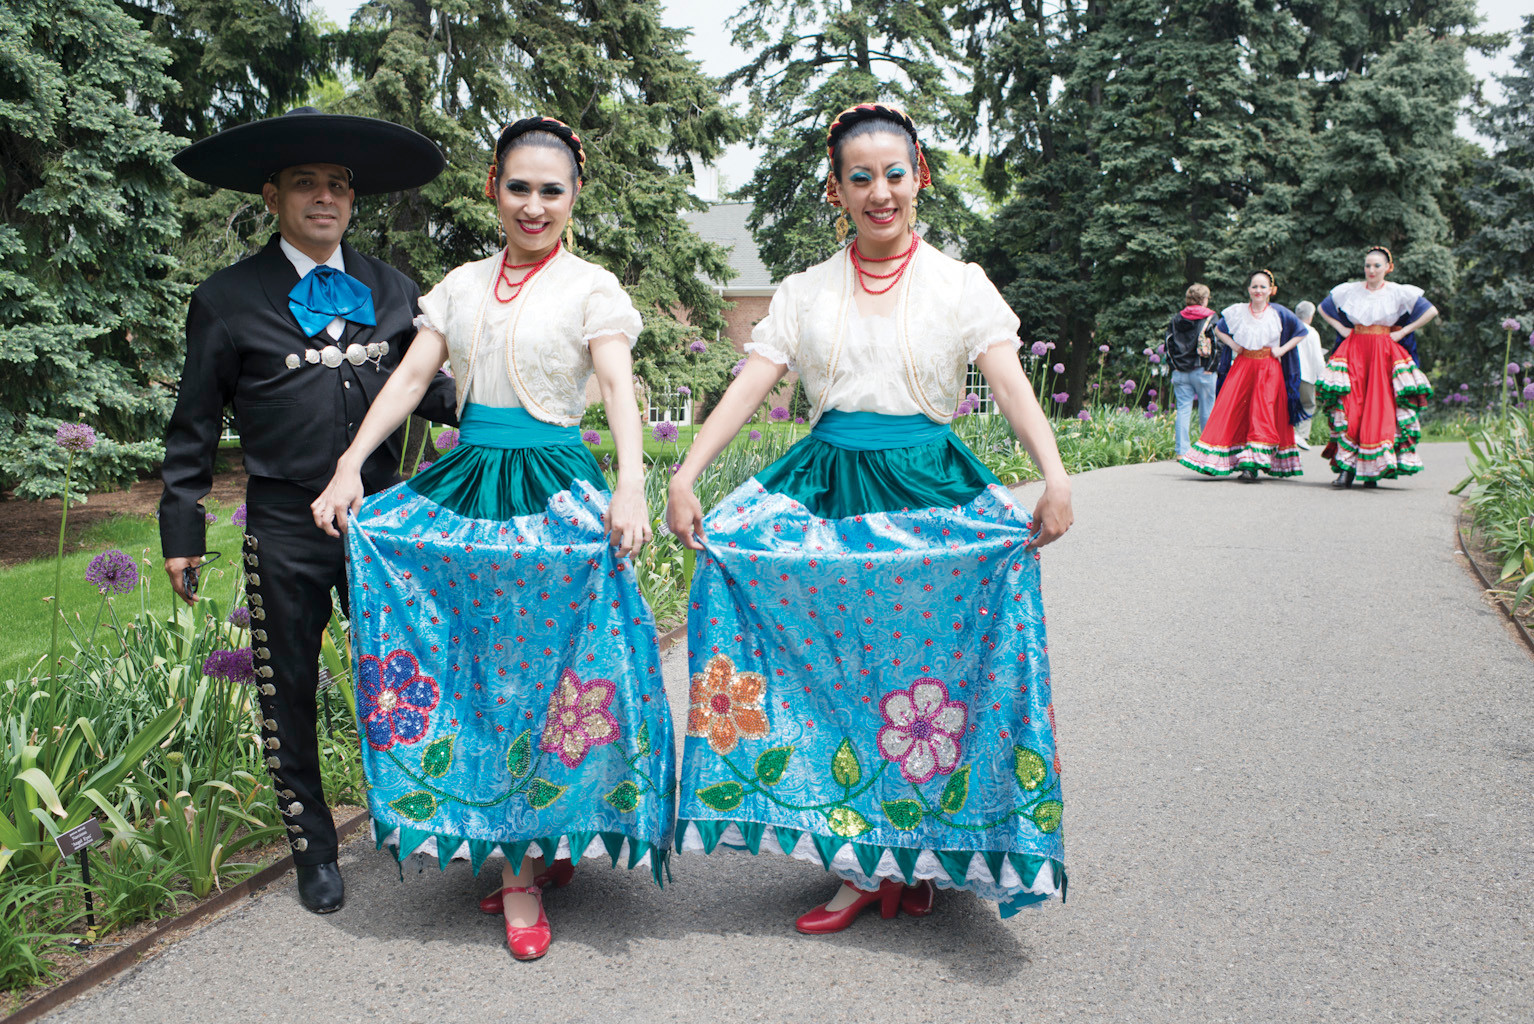 Members of the Calpulli Mexican Dance Company, based in Elmhurst, pose for a photo before running off to a performance during the 'Frida Kahlo: Art, Garden, Life' exhibit which opened for members on May 15.